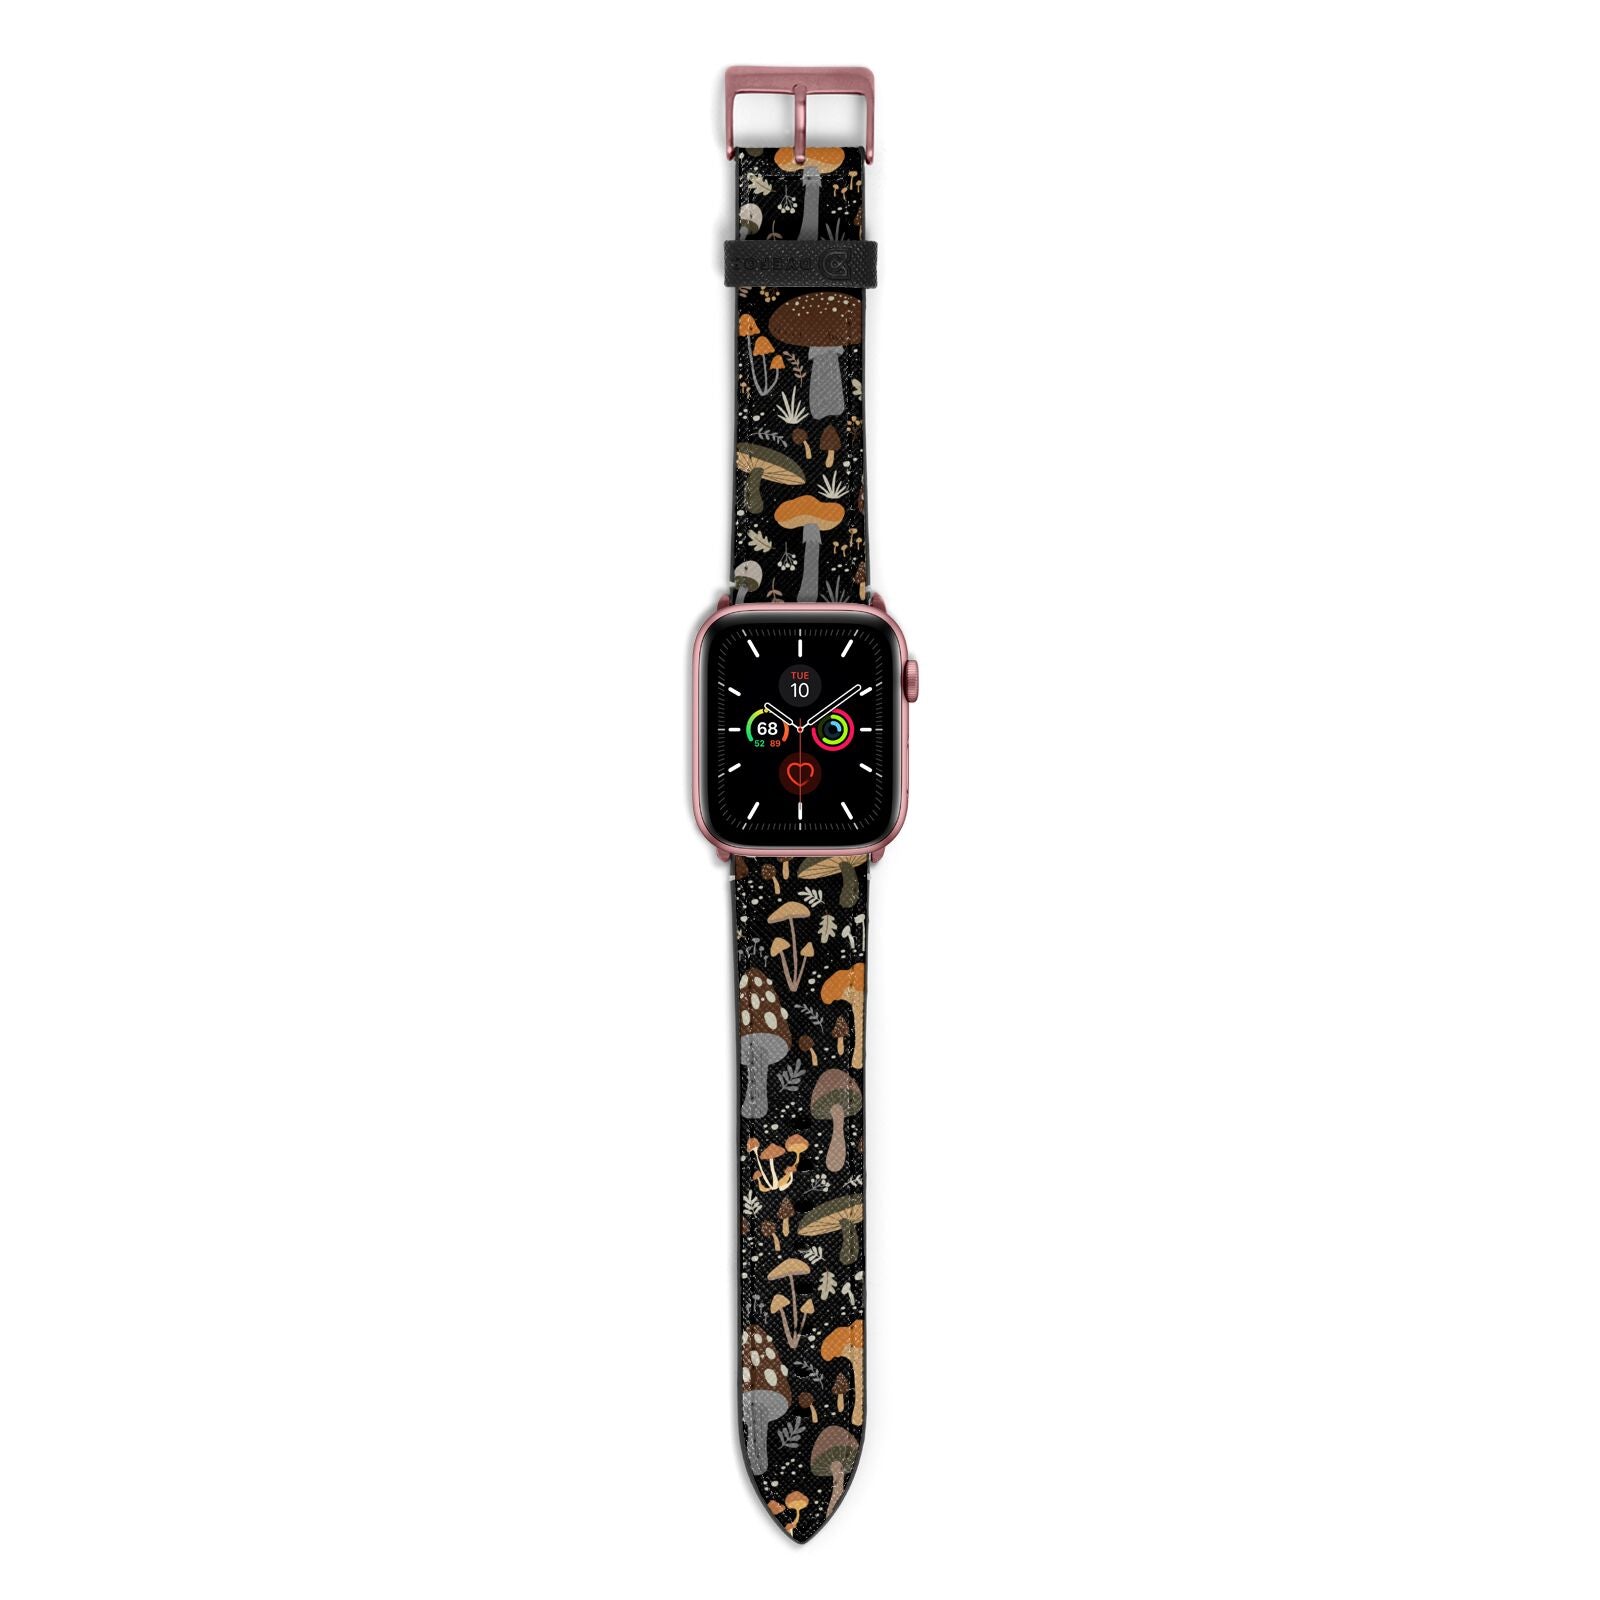 Mushroom Apple Watch Strap with Rose Gold Hardware